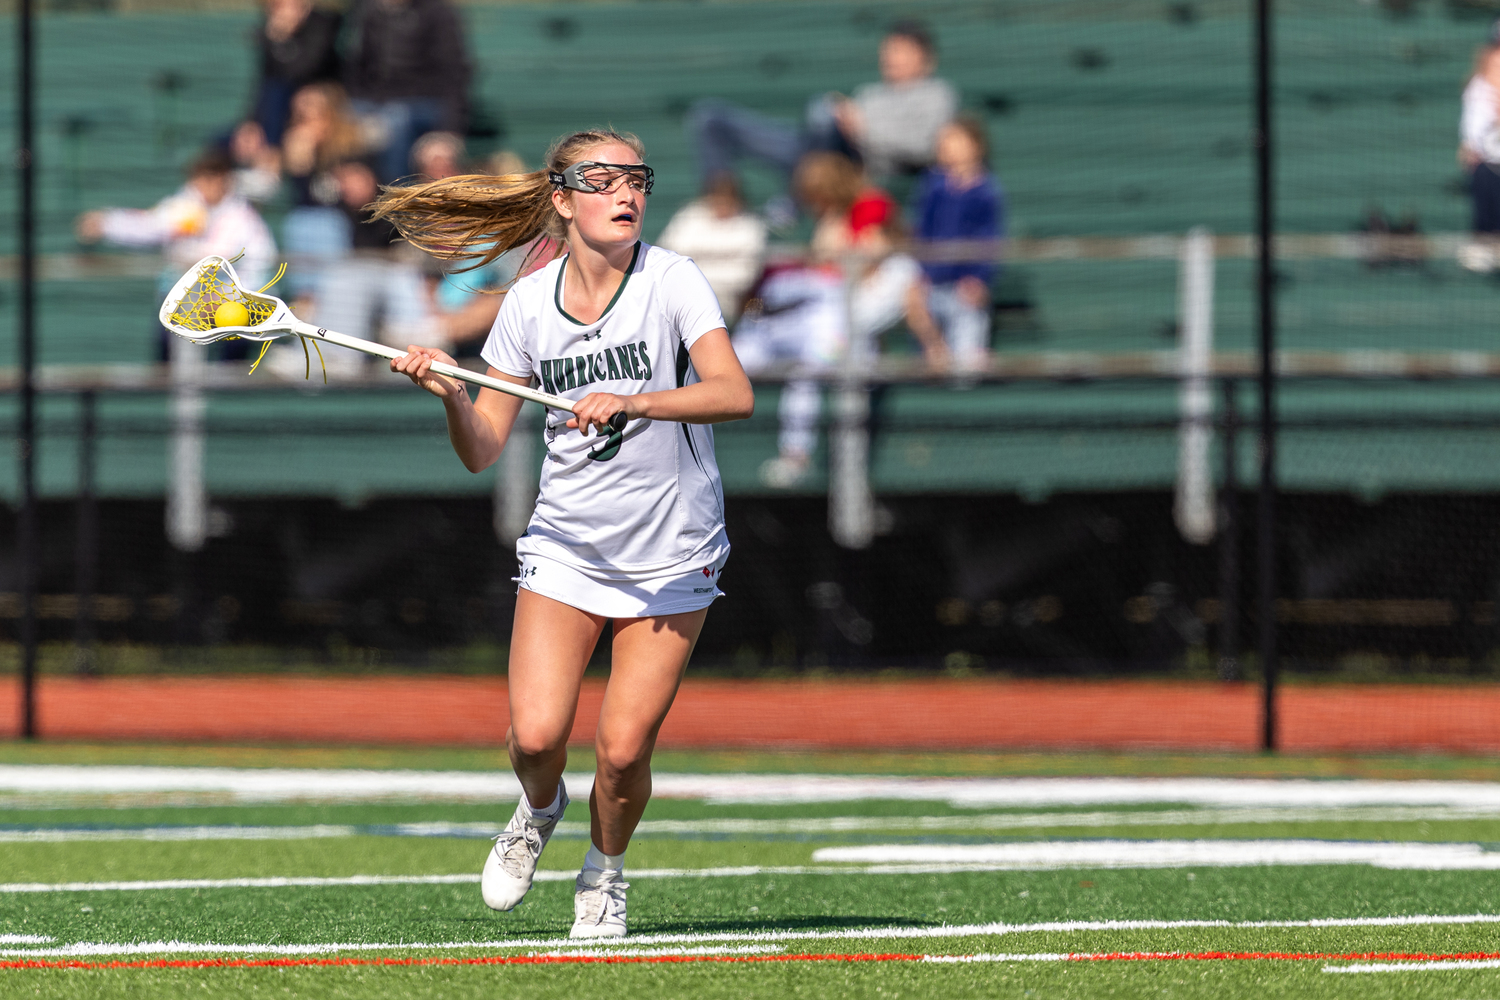 Junior midfielder Lily Graves looks for an open receiver during Westhampton Beach's 11-5 win over Miller Place April 24. RON ESPOSITO